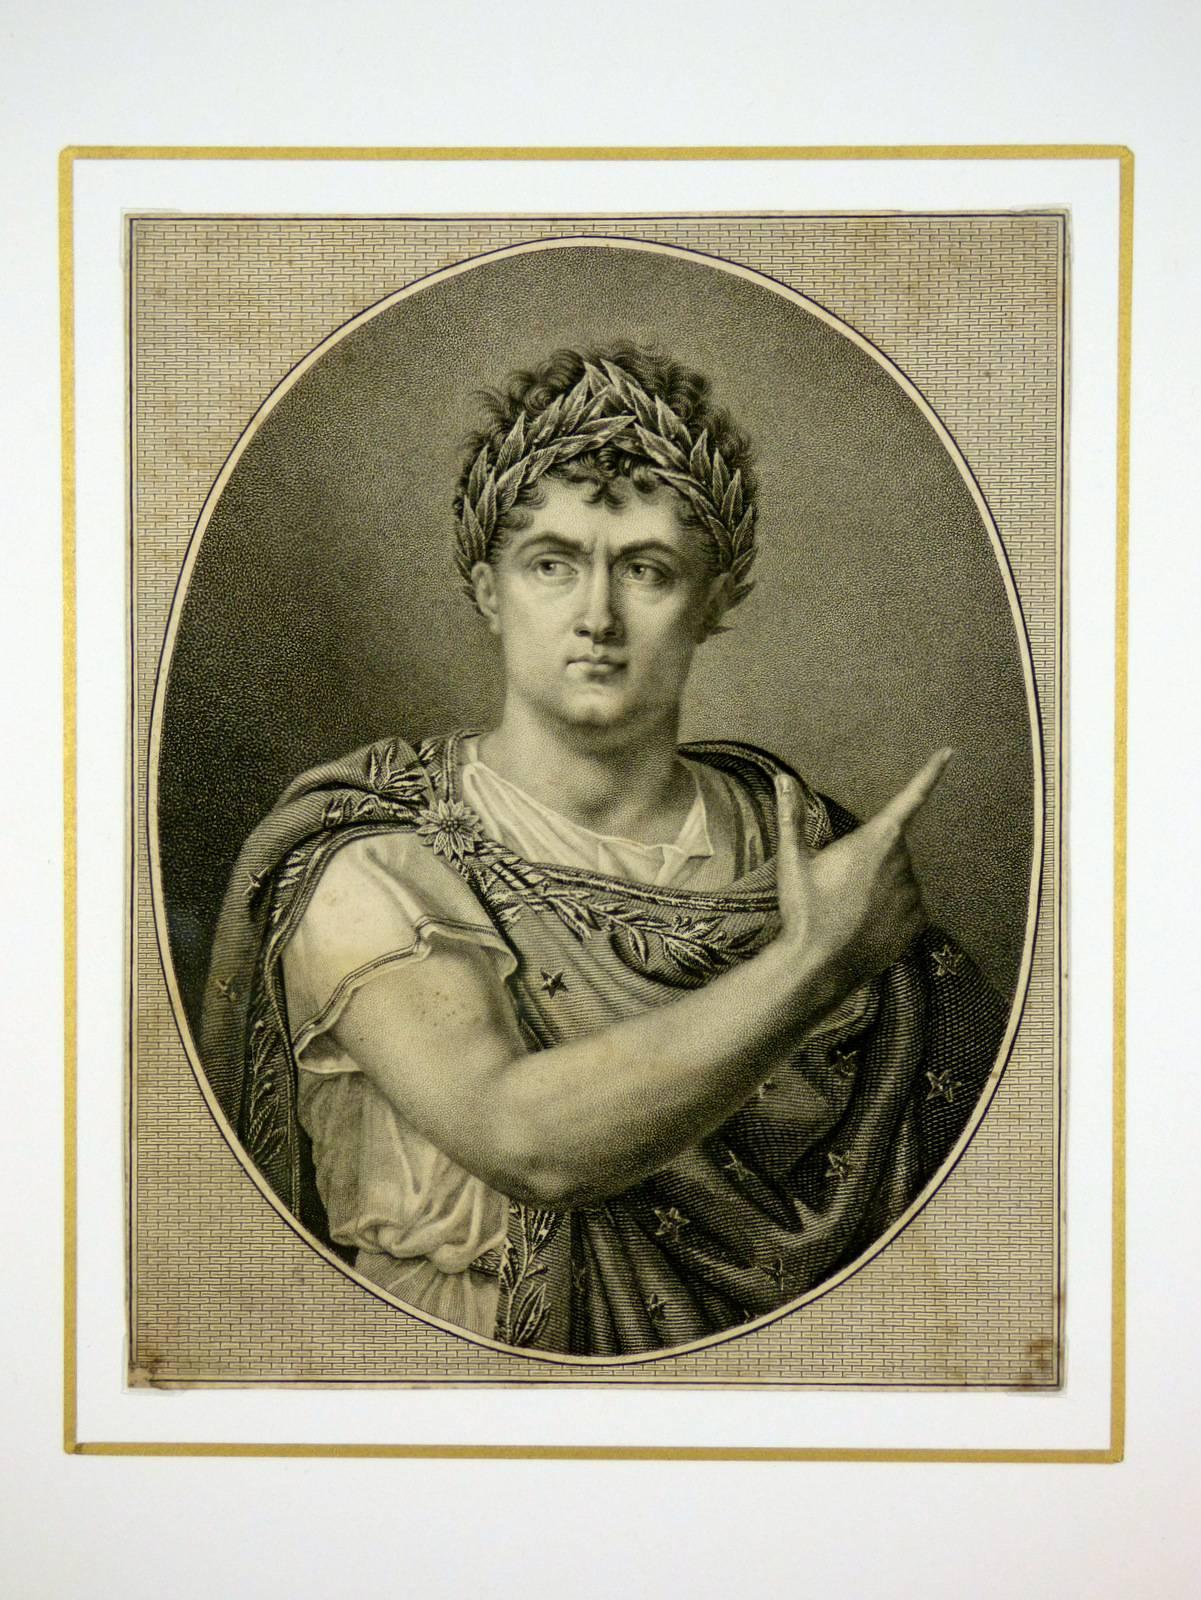 French stipple engraving portraying a stately emperor figure, circa 1830. 

Original artwork on paper displayed on a white mat with a gold border. Mat fits a standard-size frame.  Archival plastic sleeve and Certificate of Authenticity included.